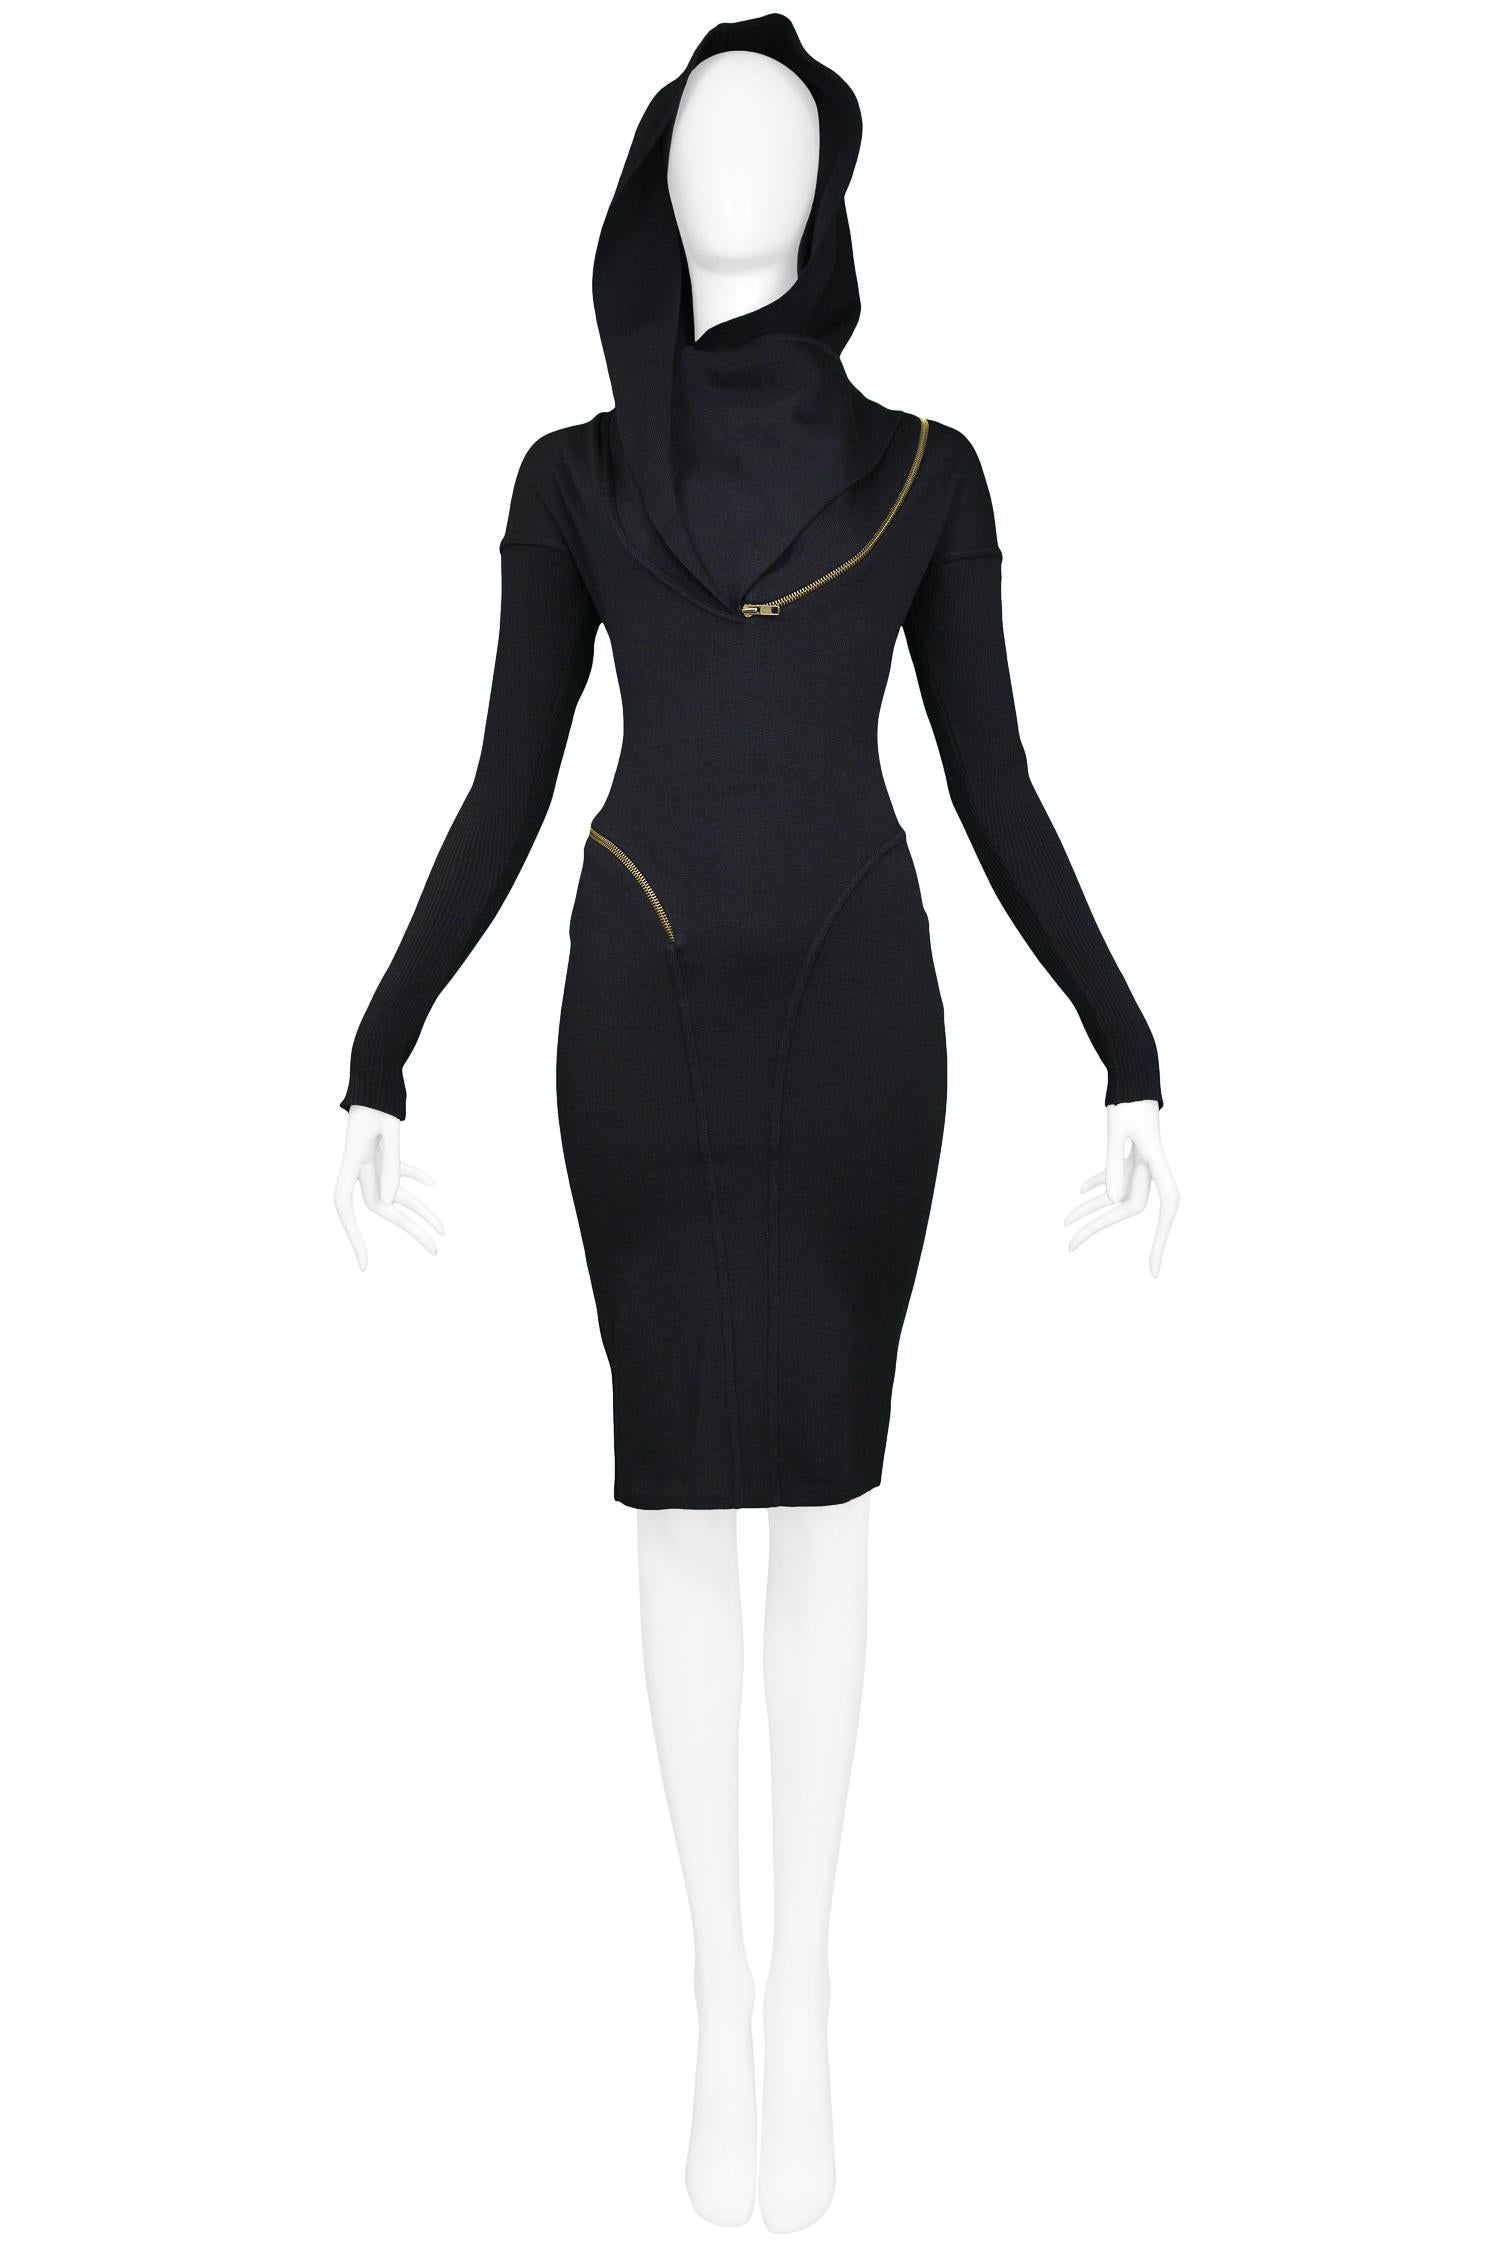 Vintage iconic museum quality 1986 Azzedine Alaia black knit hooded zipper dress featuring a slim body-con fit, long sleeves & brass zipper detail that wraps around the body. The collar can be zipped into a hood or worn unzipped as a collar.